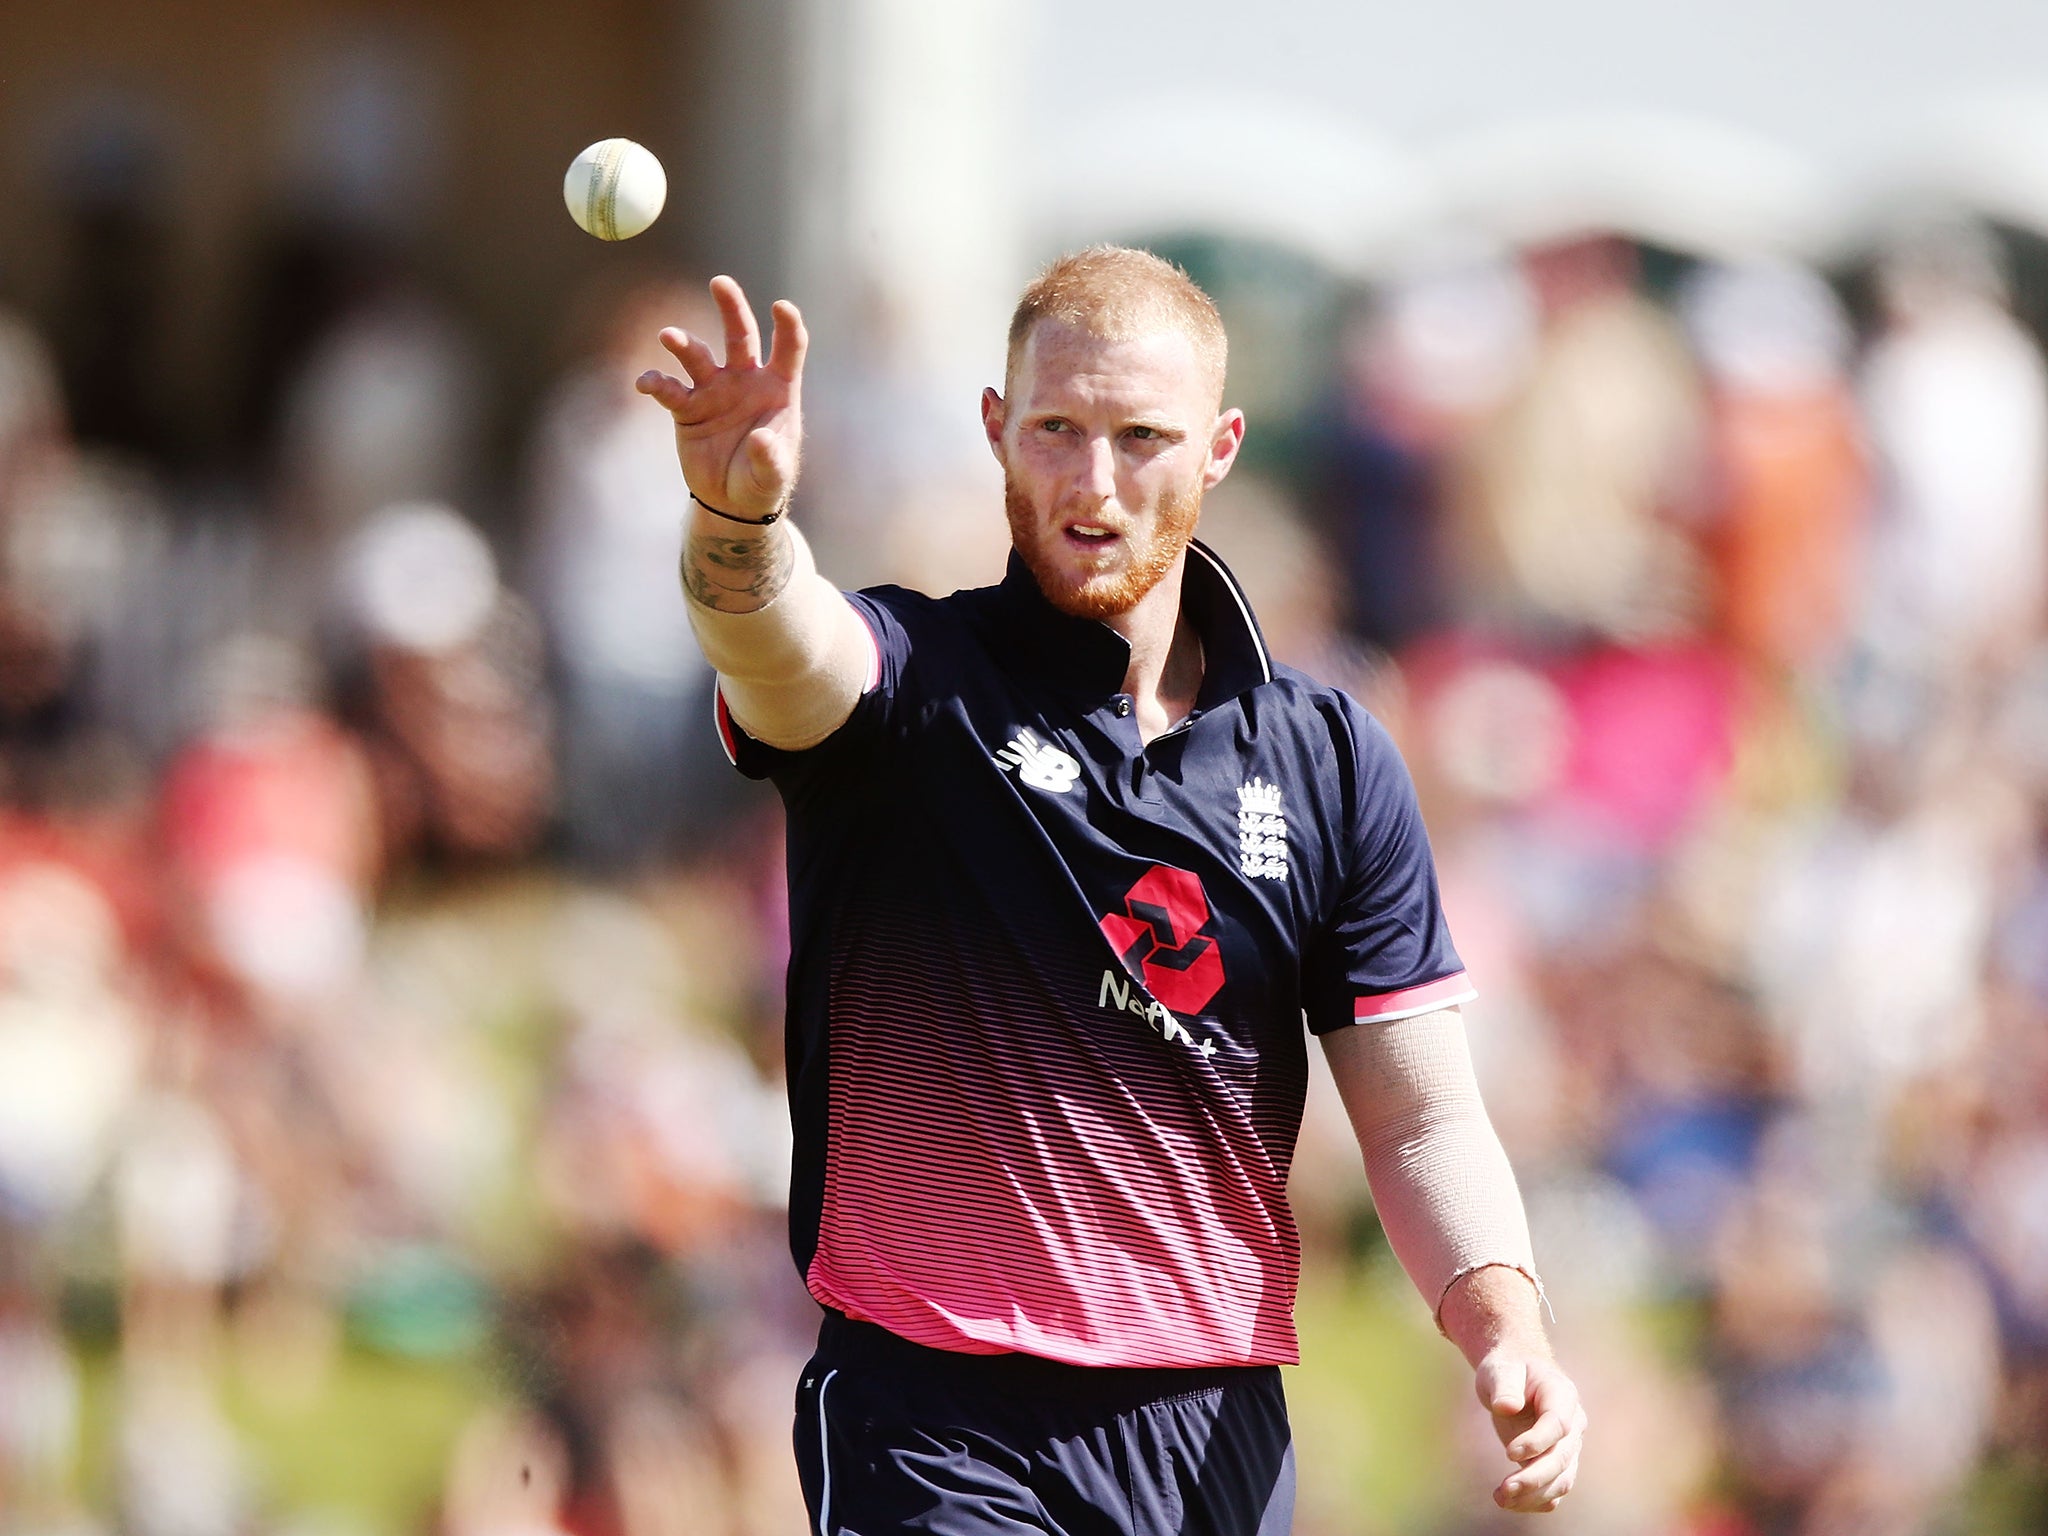 Ben Stokes admitted his man-of-the-match display for England made him 'emotional'